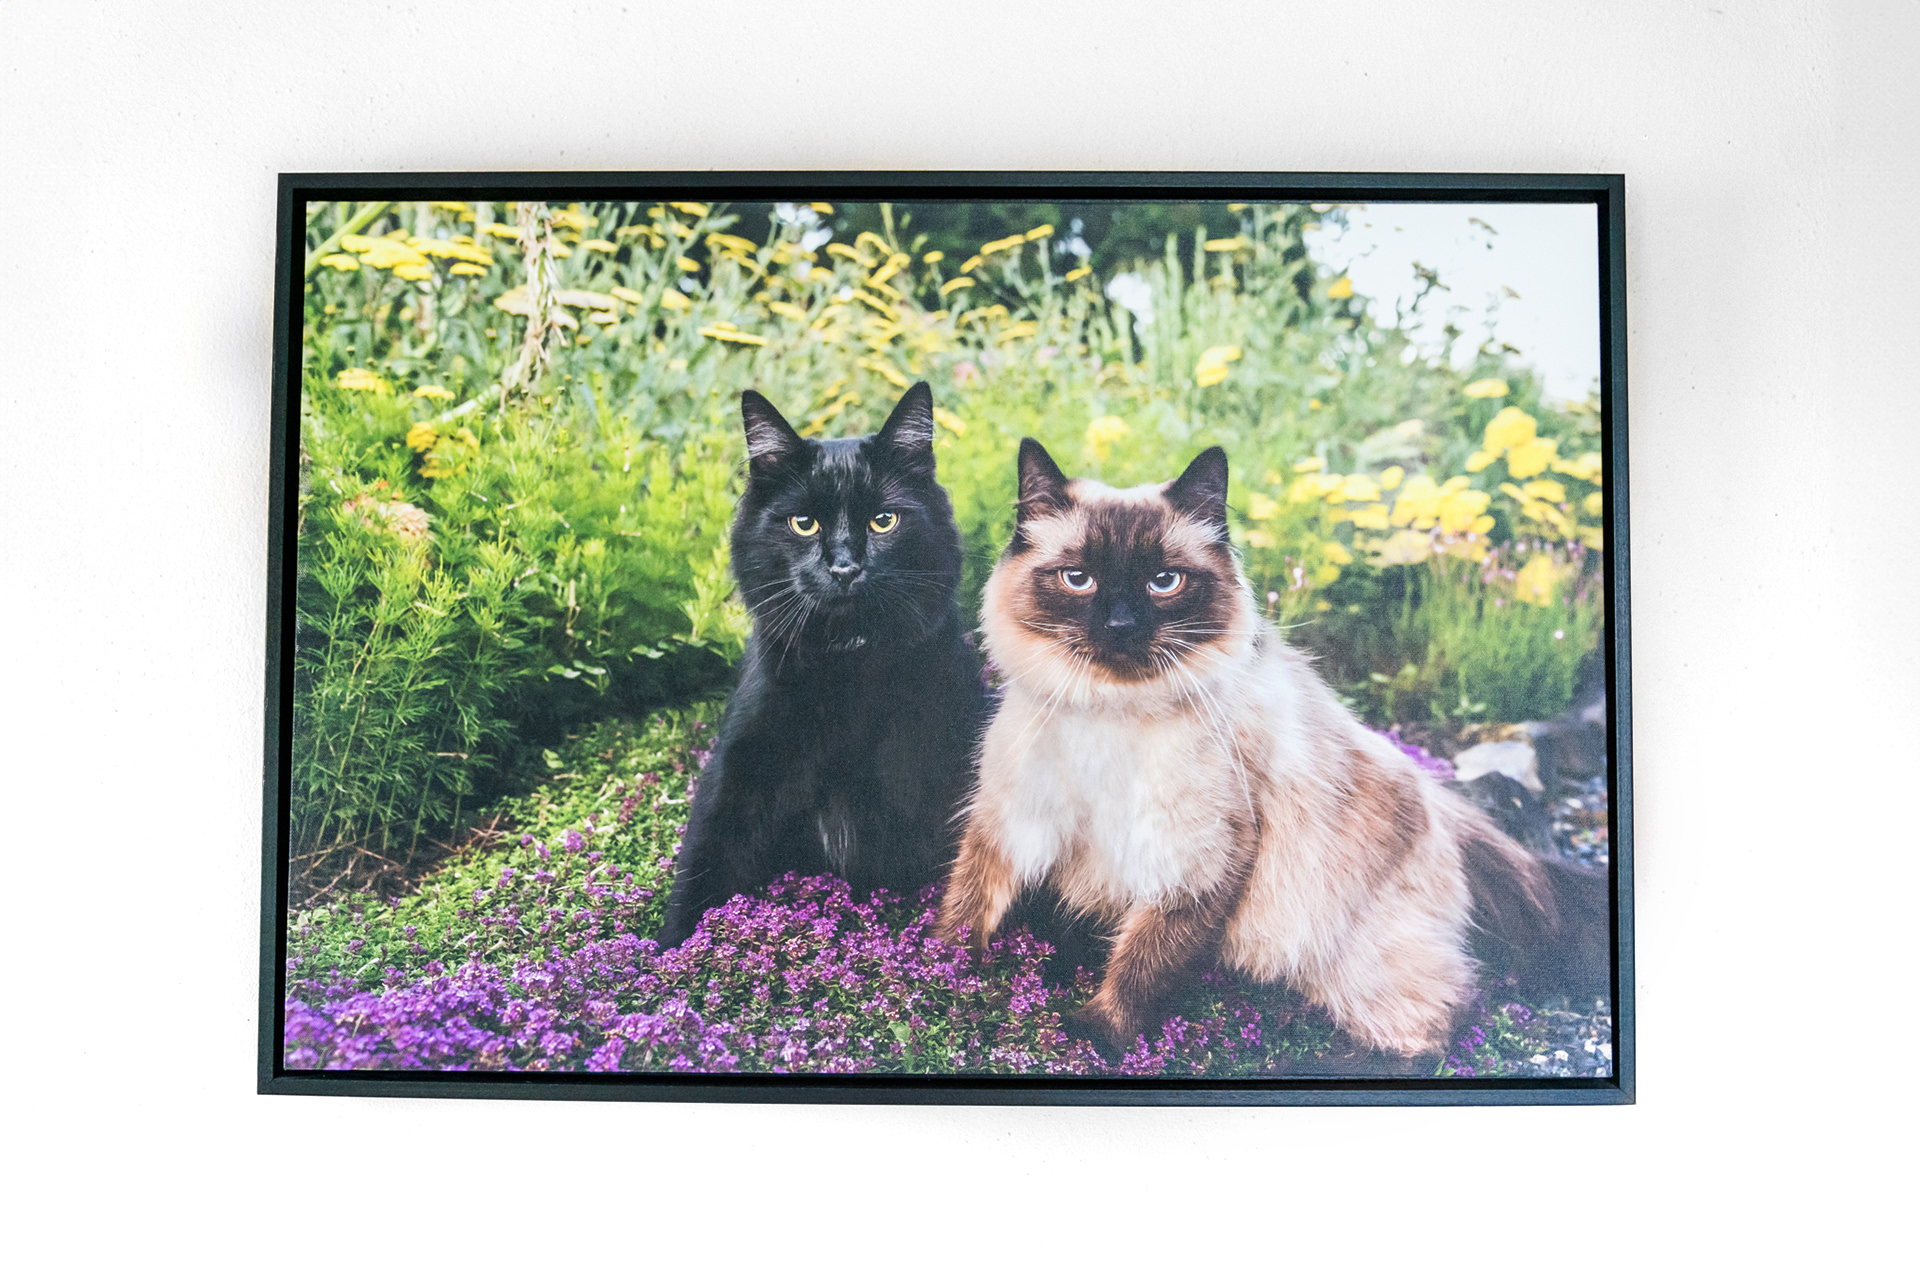 Two cats sitting in a garden with flowers